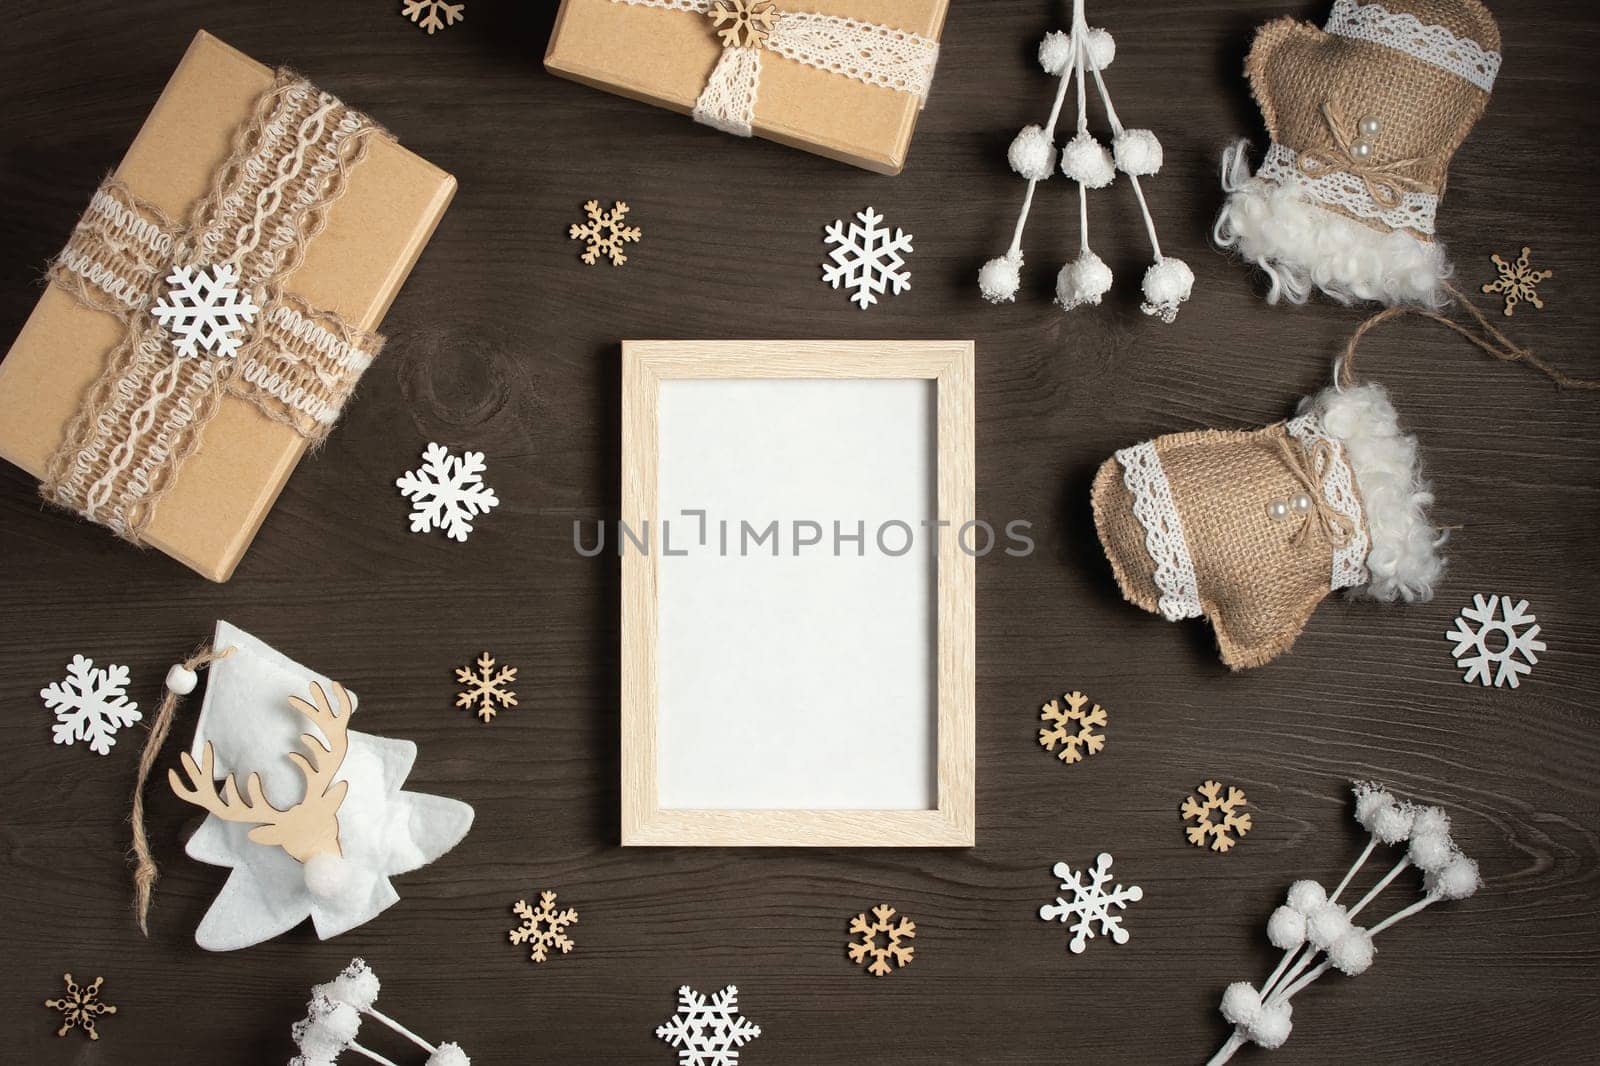 An empty frame on a wooden table surrounded by Christmas gifts and ornaments made of natural materials. A mockup for greeting cards and advertisements by galsand